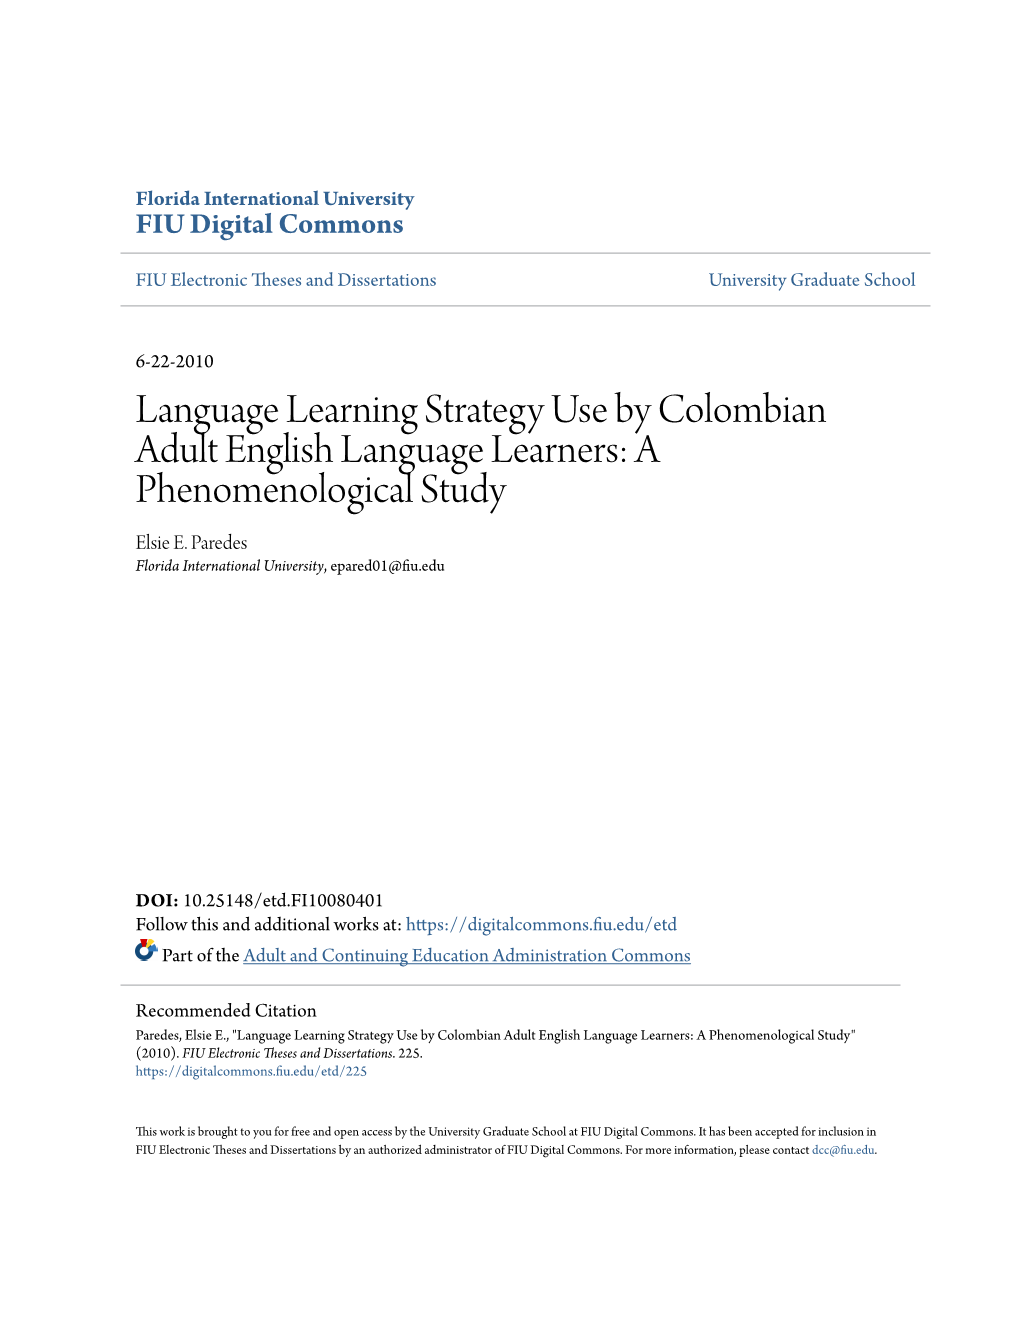 Language Learning Strategy Use by Colombian Adult English Language Learners: a Phenomenological Study Elsie E